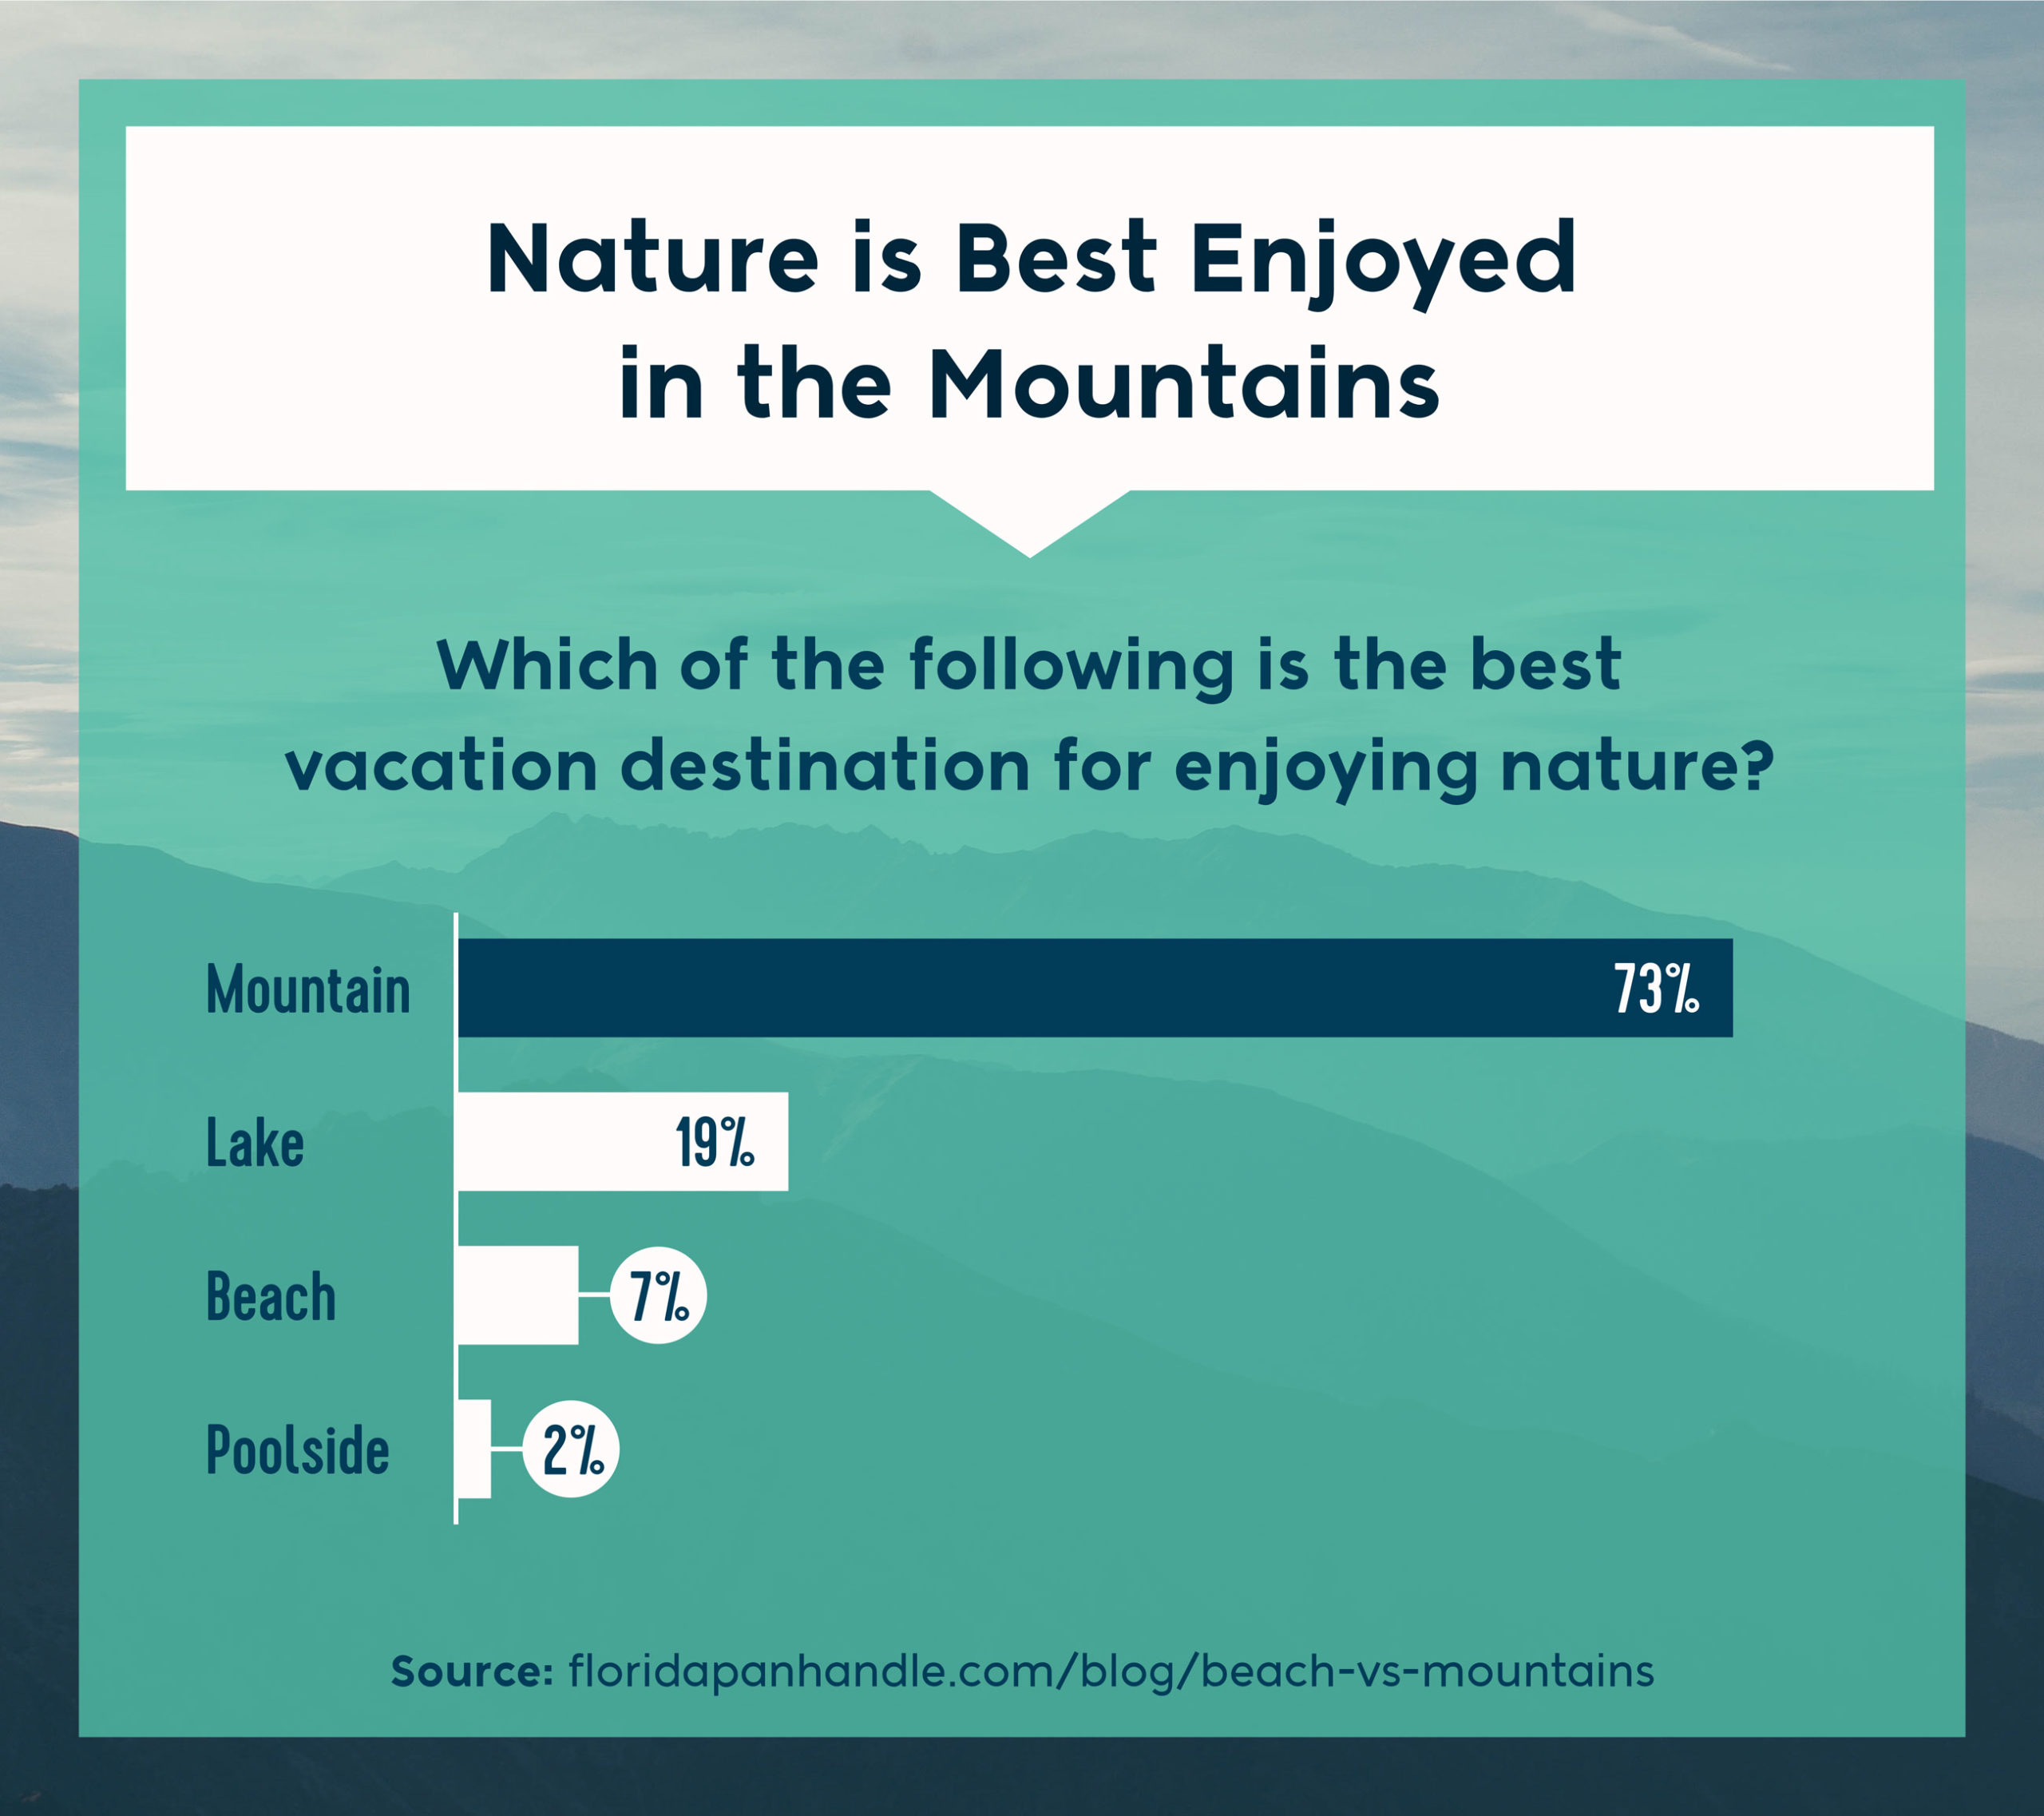 which of the following is the best vacation destination for enjoying nature